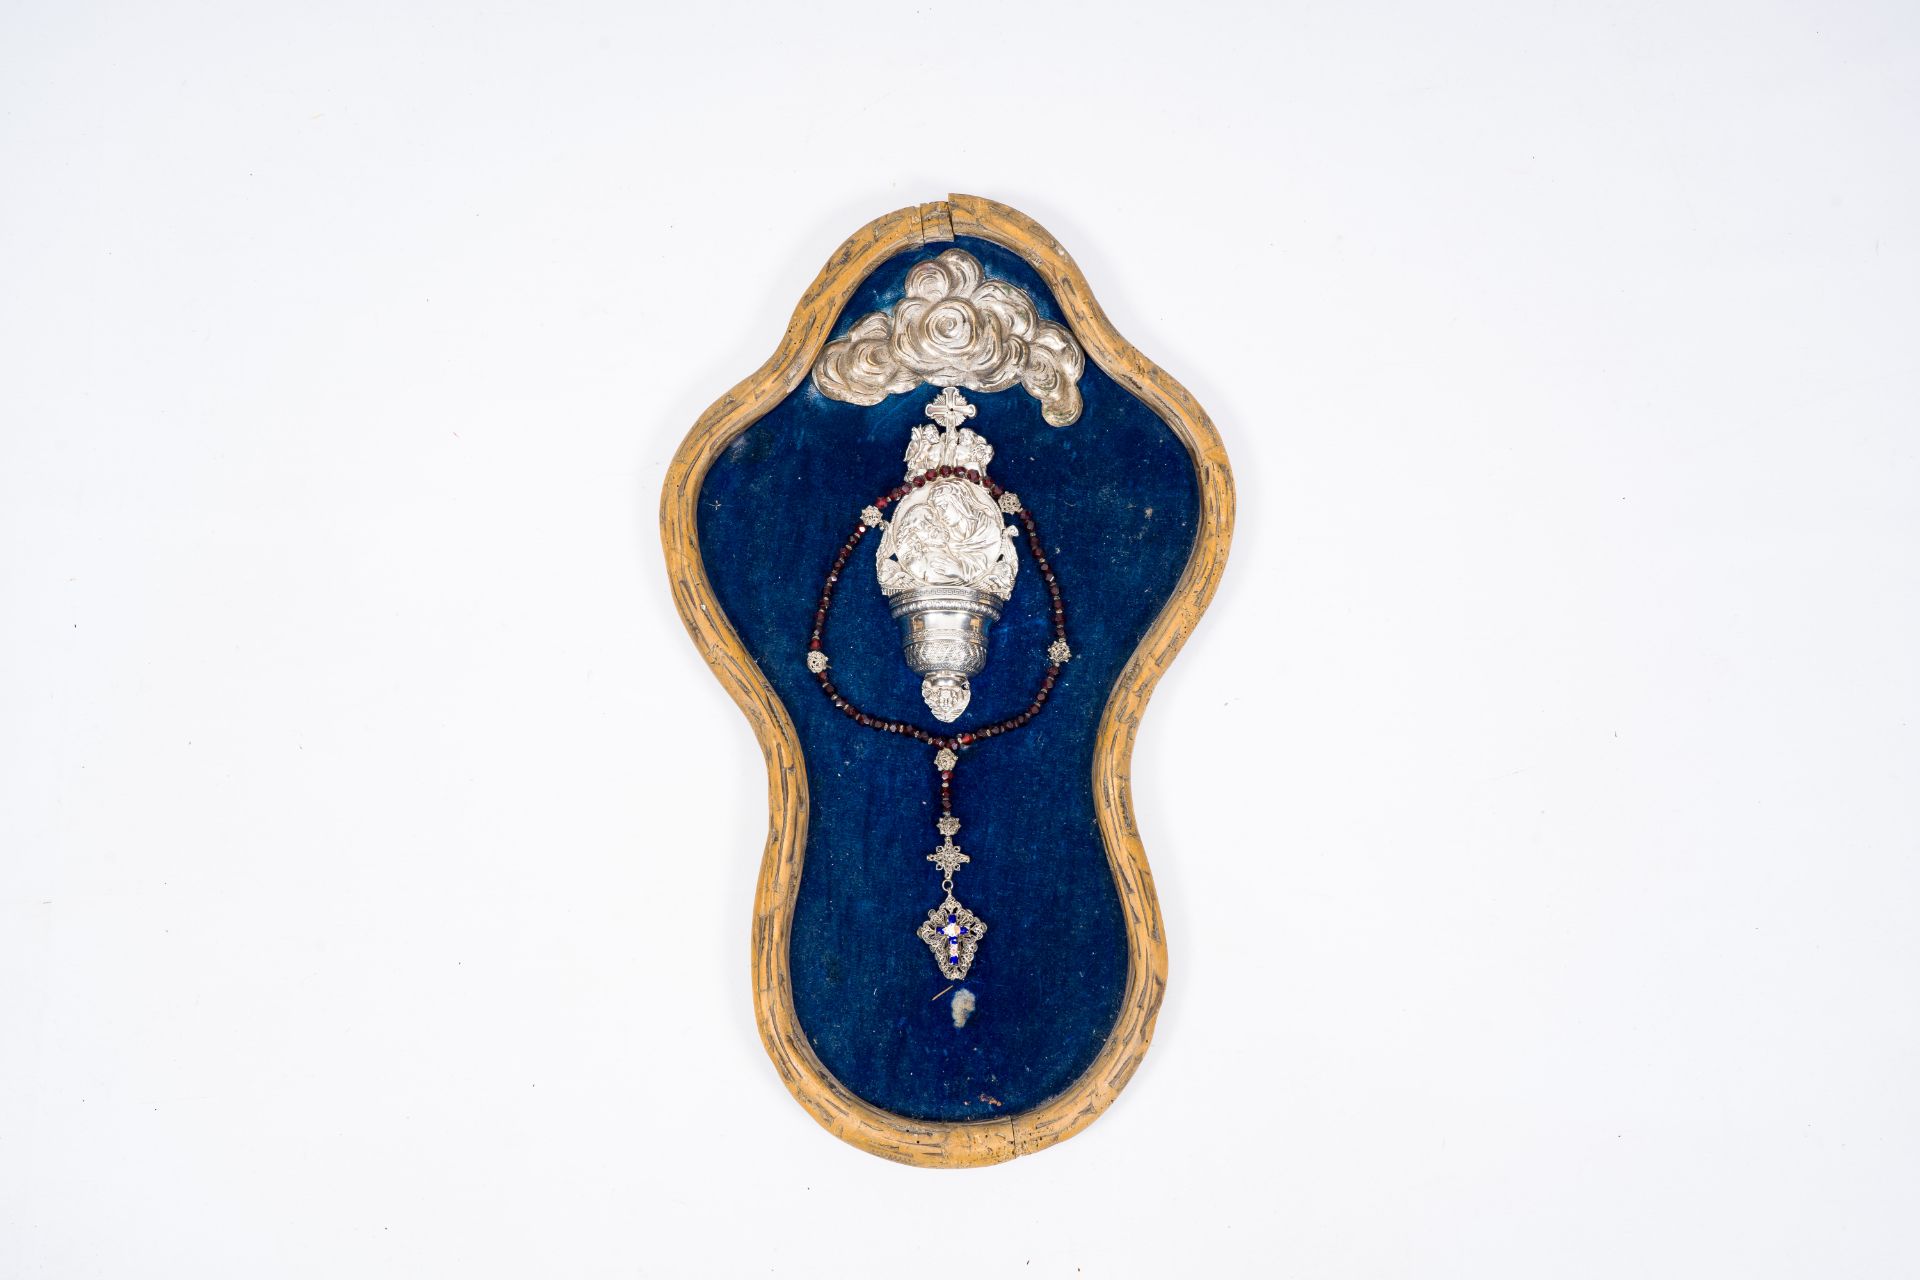 An Italian Lombardo-Veneto holy water font and a necklace with enamel decoration, Milan, early 19th